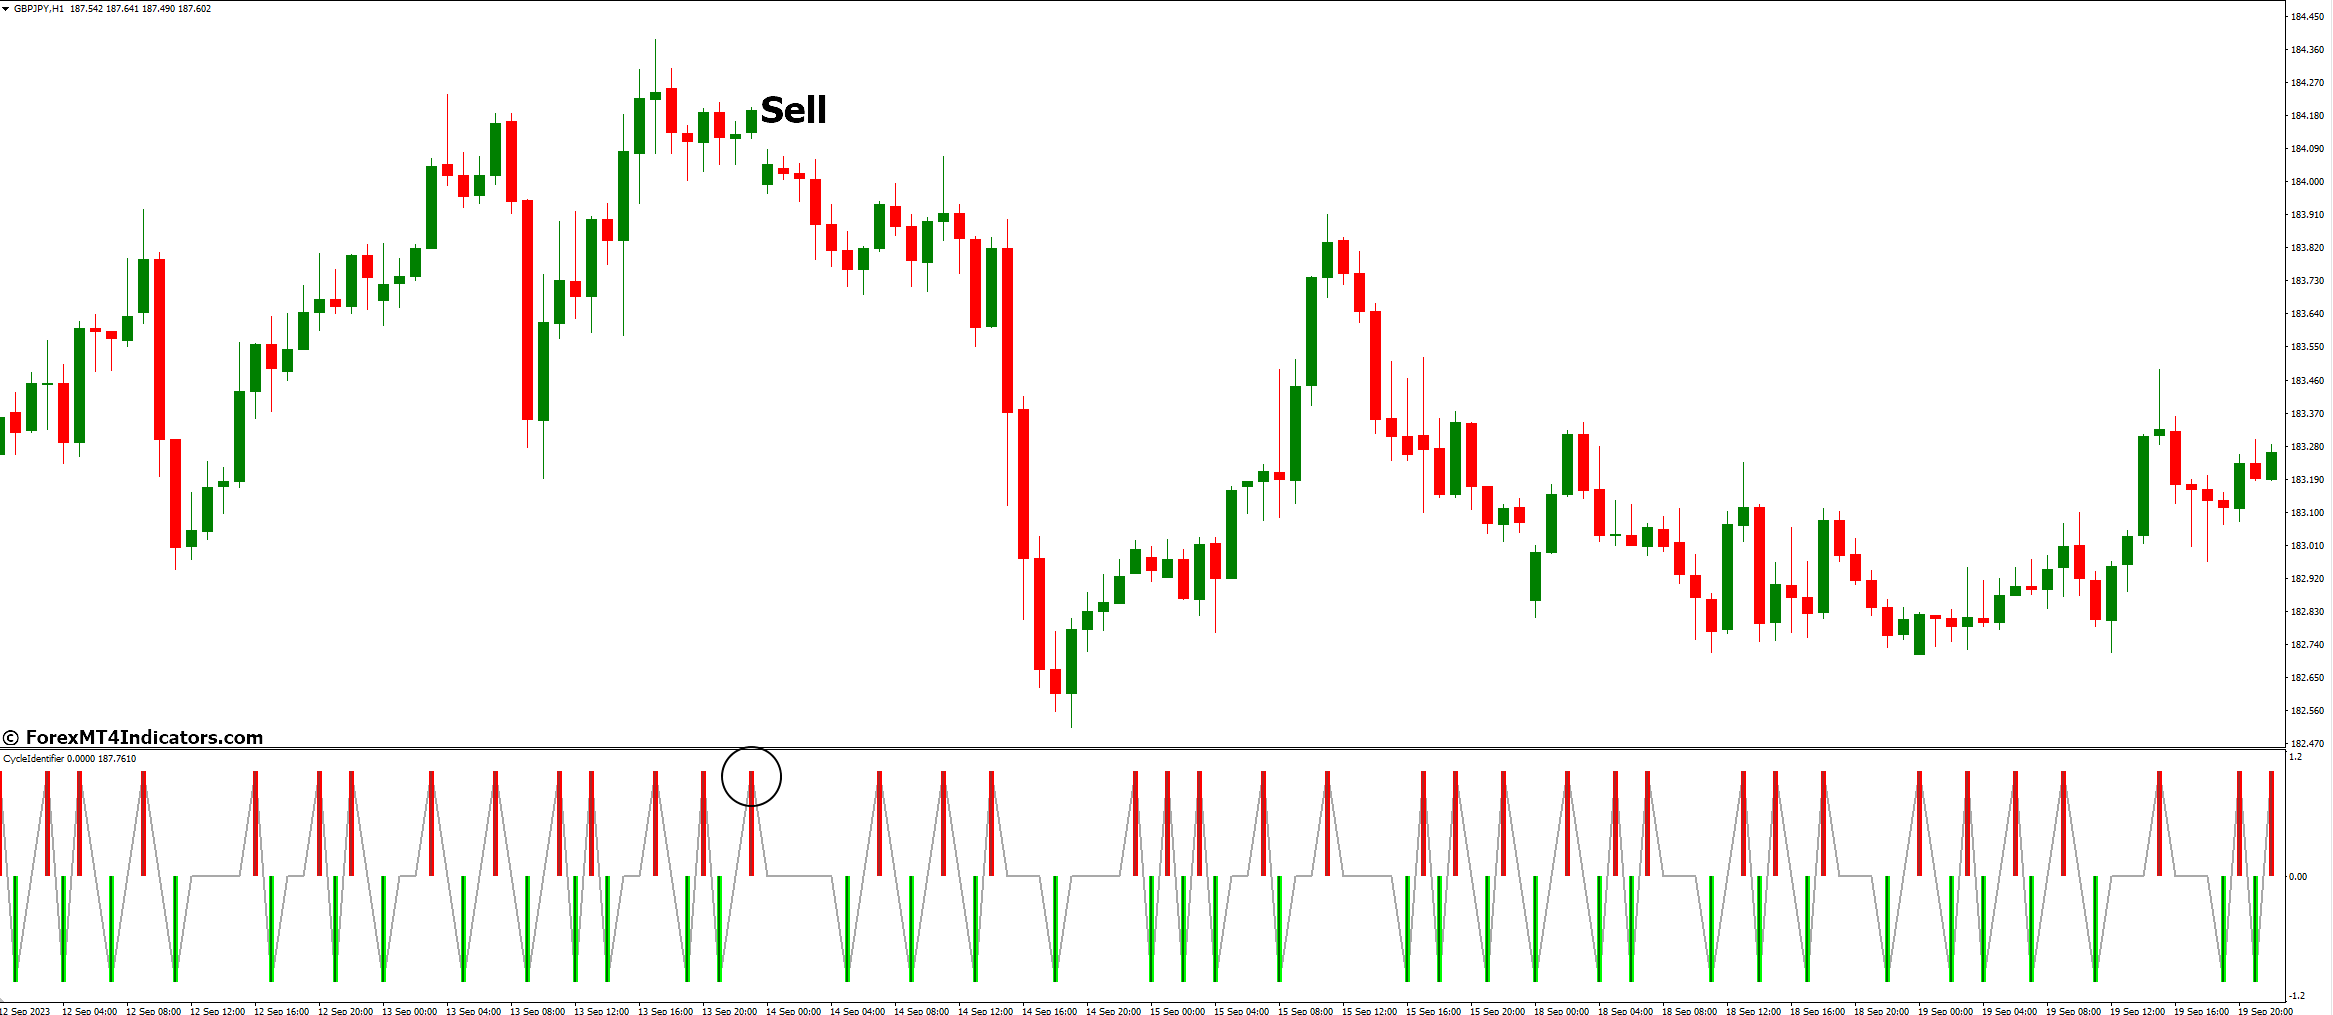 How to Trade with Cycle Identifier Indicator - Sell Entry